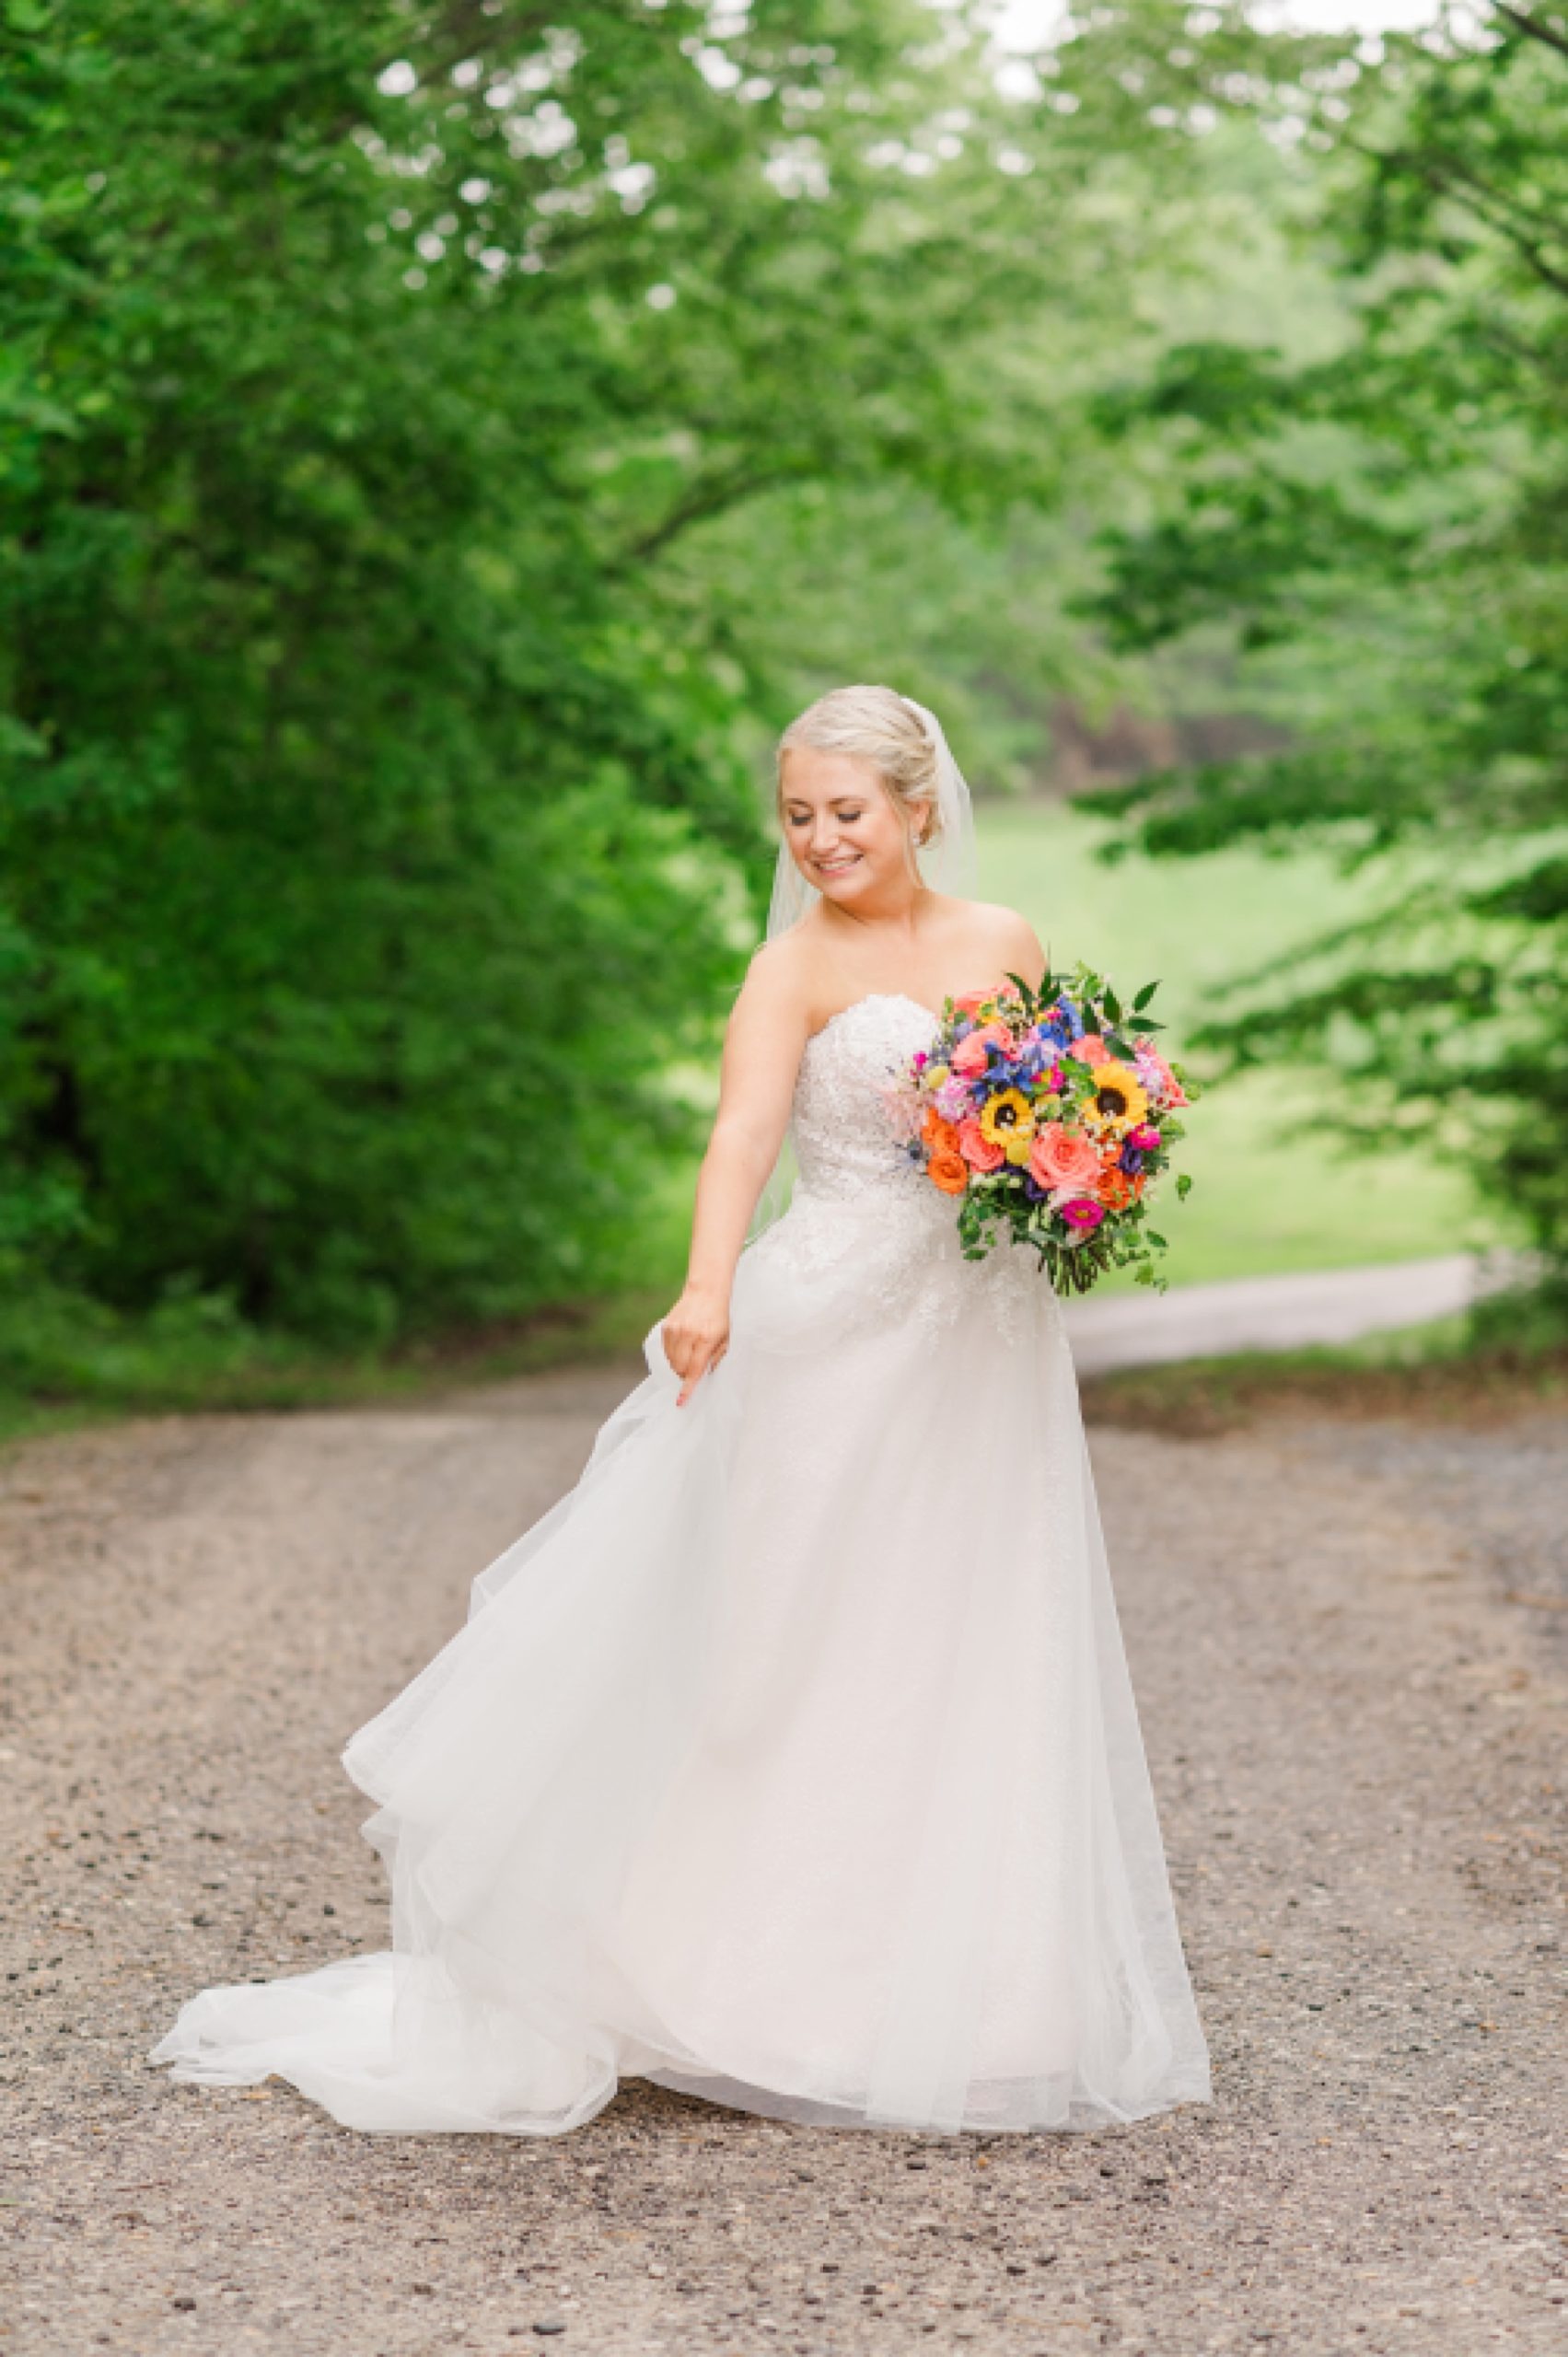 Bridal Portraits at Barn at Timber Creek Wedding. Wedding Photography by Kailey Brianne Photography